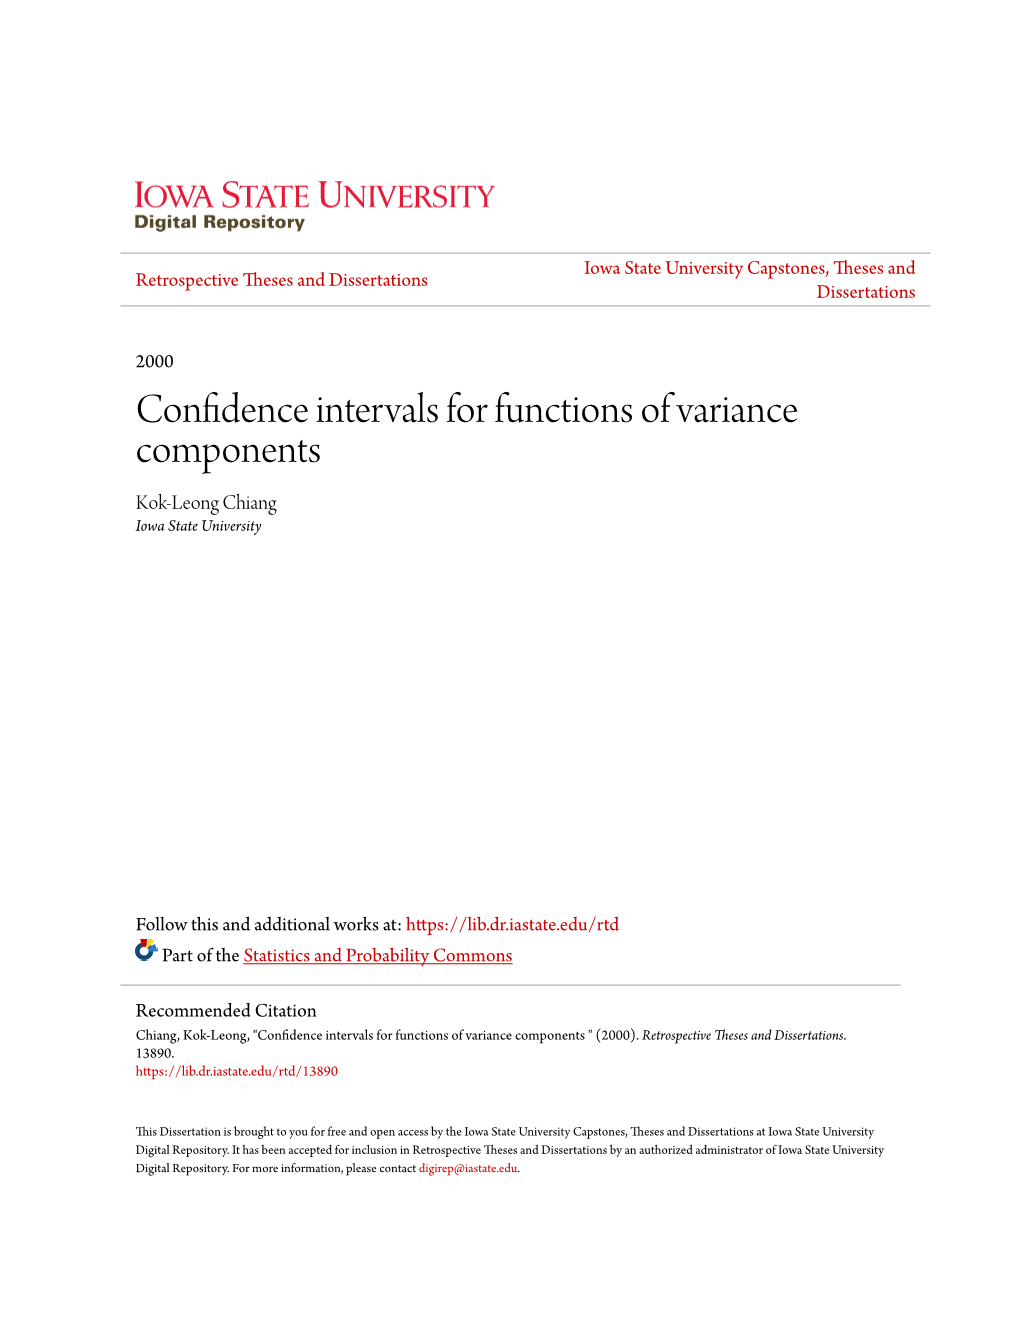 Confidence Intervals for Functions of Variance Components Kok-Leong Chiang Iowa State University